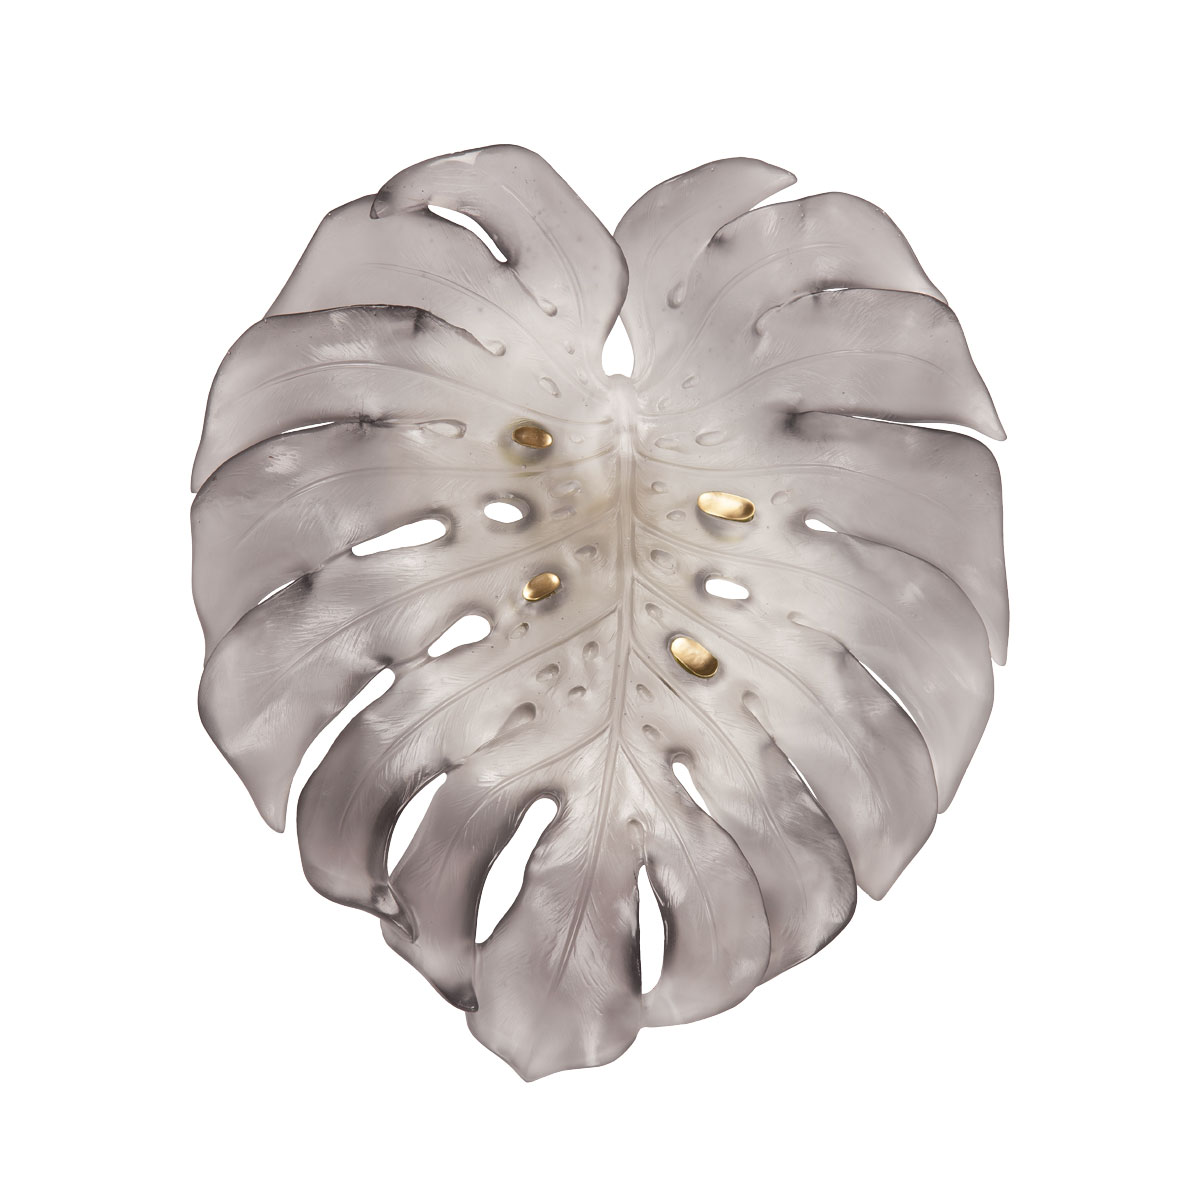 Daum Large Short-Fixture Monstera Wall Lamp in Grey by Emilio Robba, Sconce